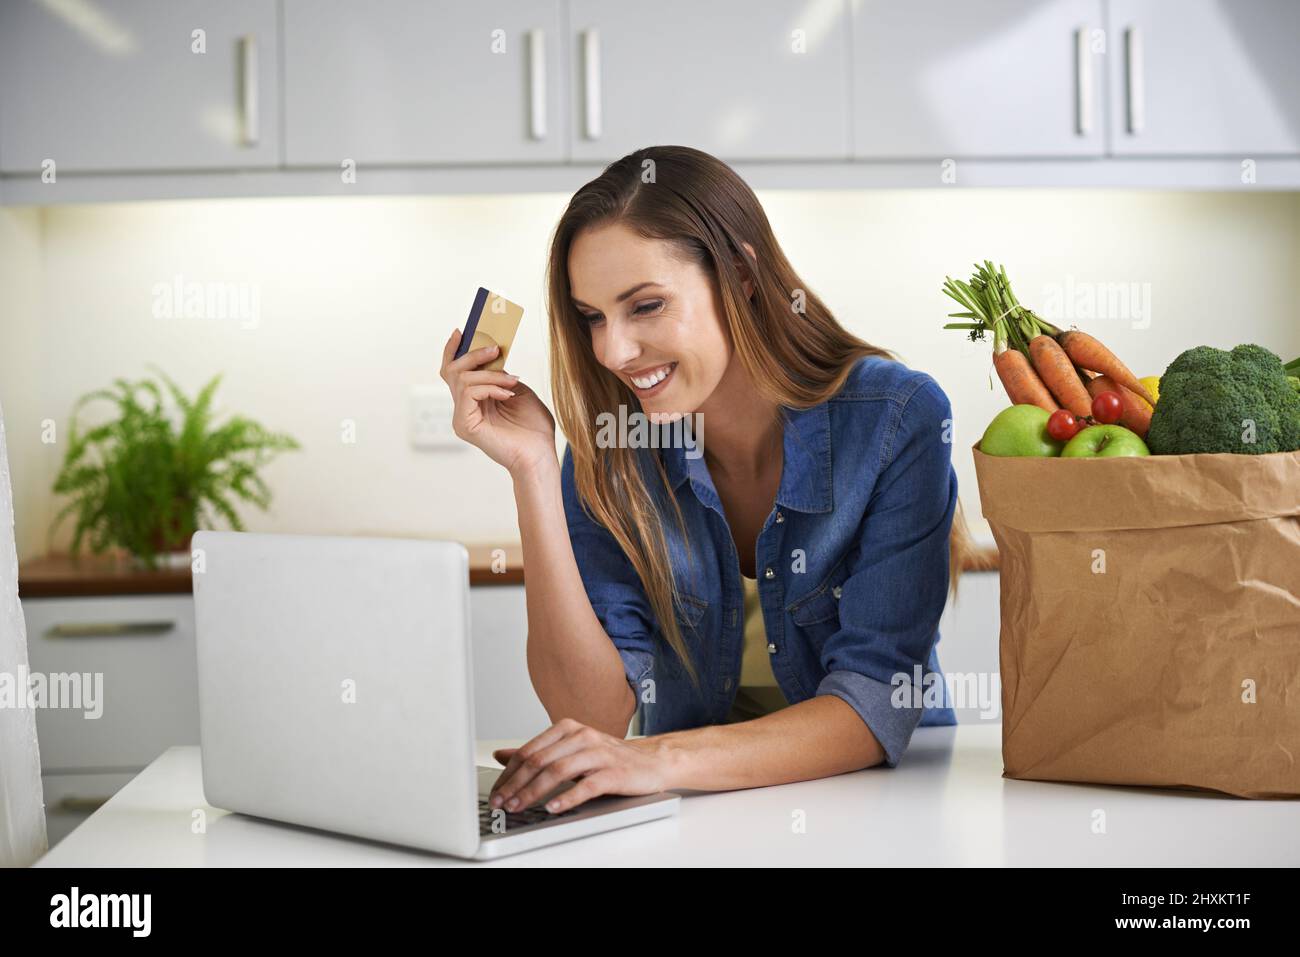 I can get everything delivered to my door. Cropped shot of a young woman doing some online shopping with her groceries beside her. Stock Photo